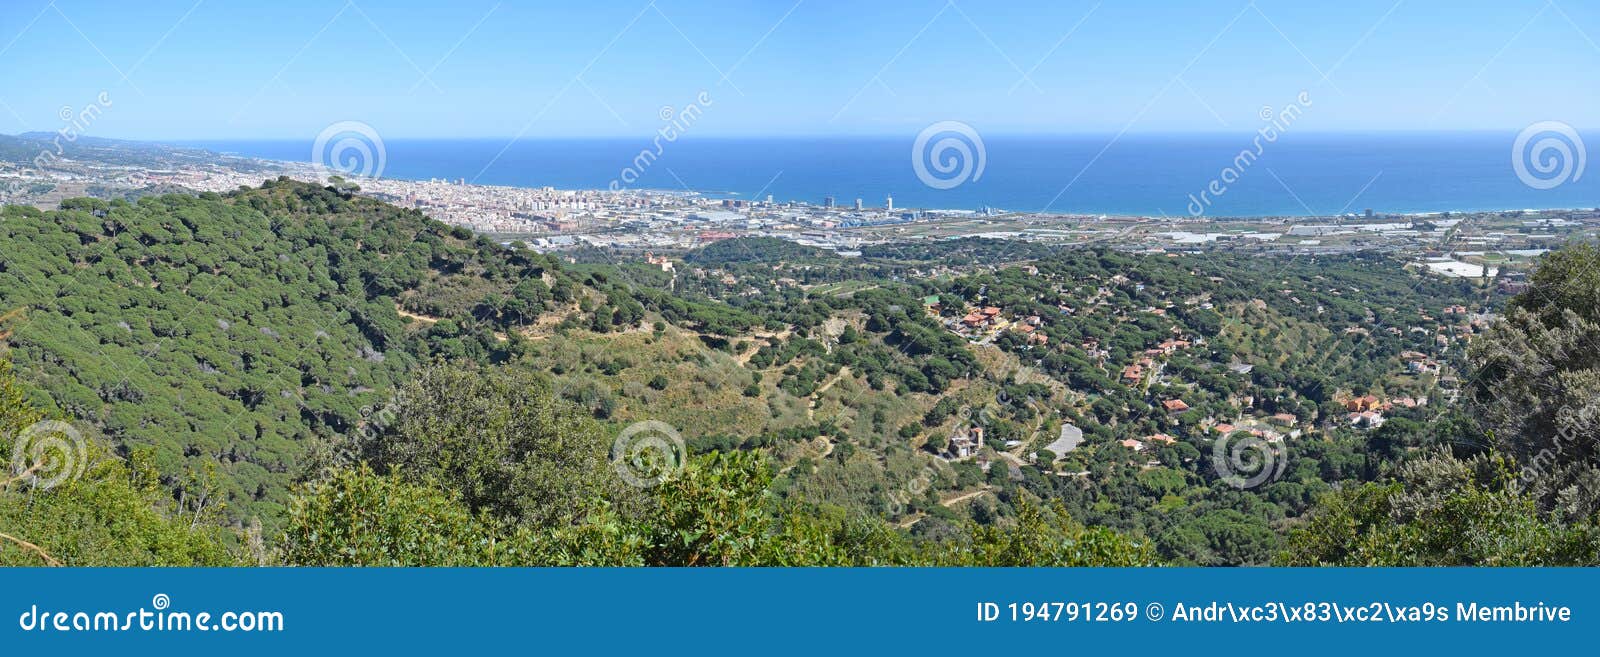 panoramic view of mountains and beaches of maresme barcelona